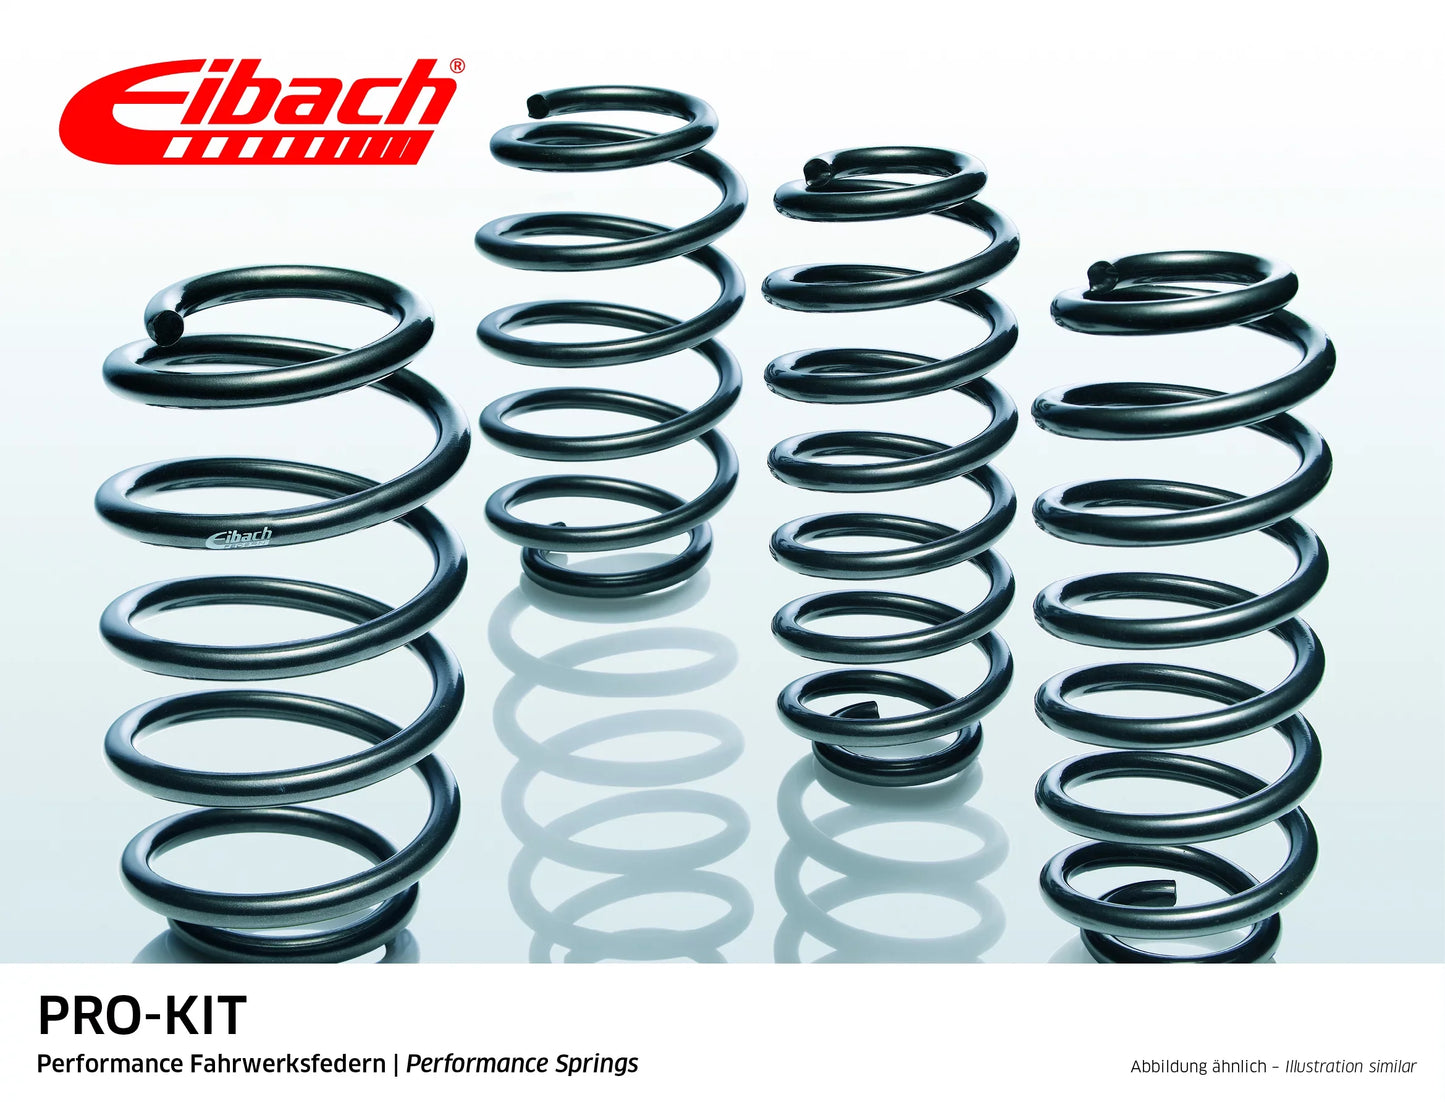 Eibach Pro-Kit Lowering Springs (E10-30-008-01-22) at £244.80